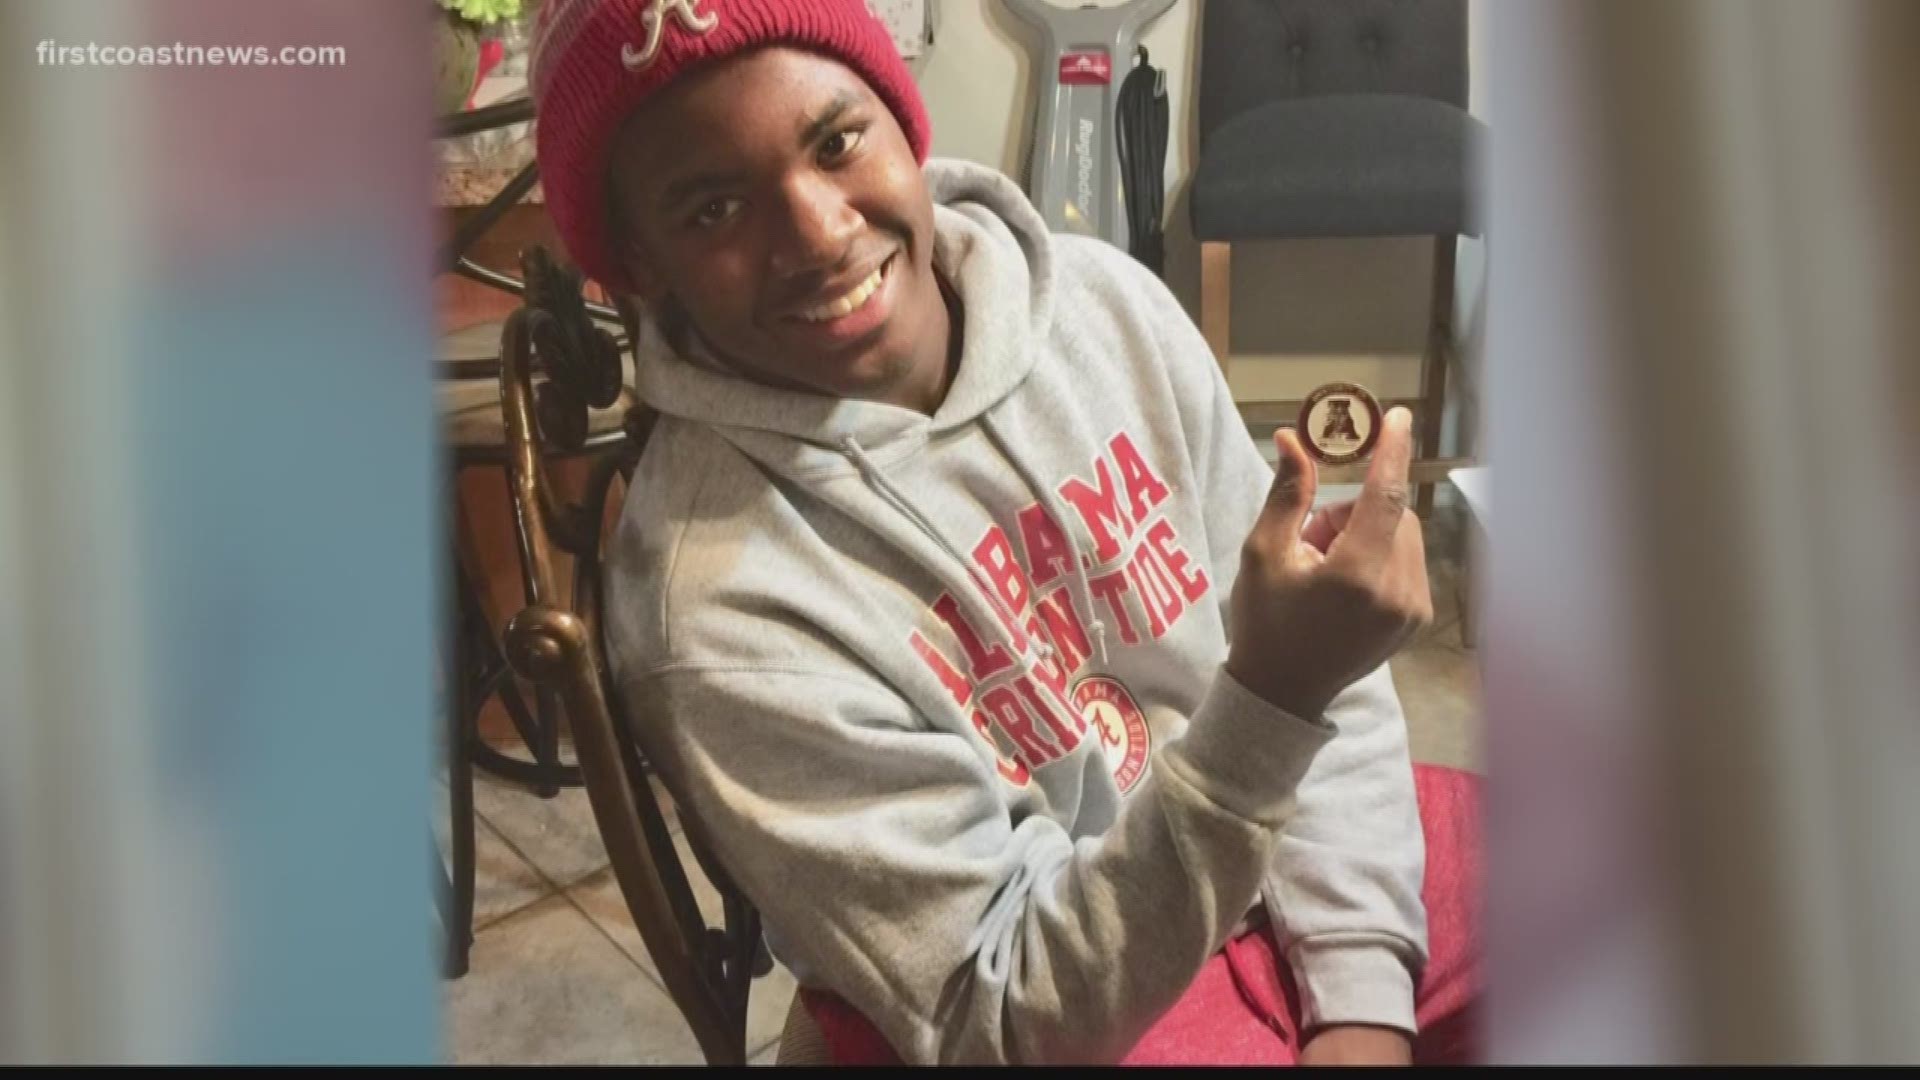 Darnell Deas Jr., known as DJ, was a popular 16-year-old honor roll student athlete. He took his life and nearly six months after his death, his mom Cheryl is encouraging parents to take action.